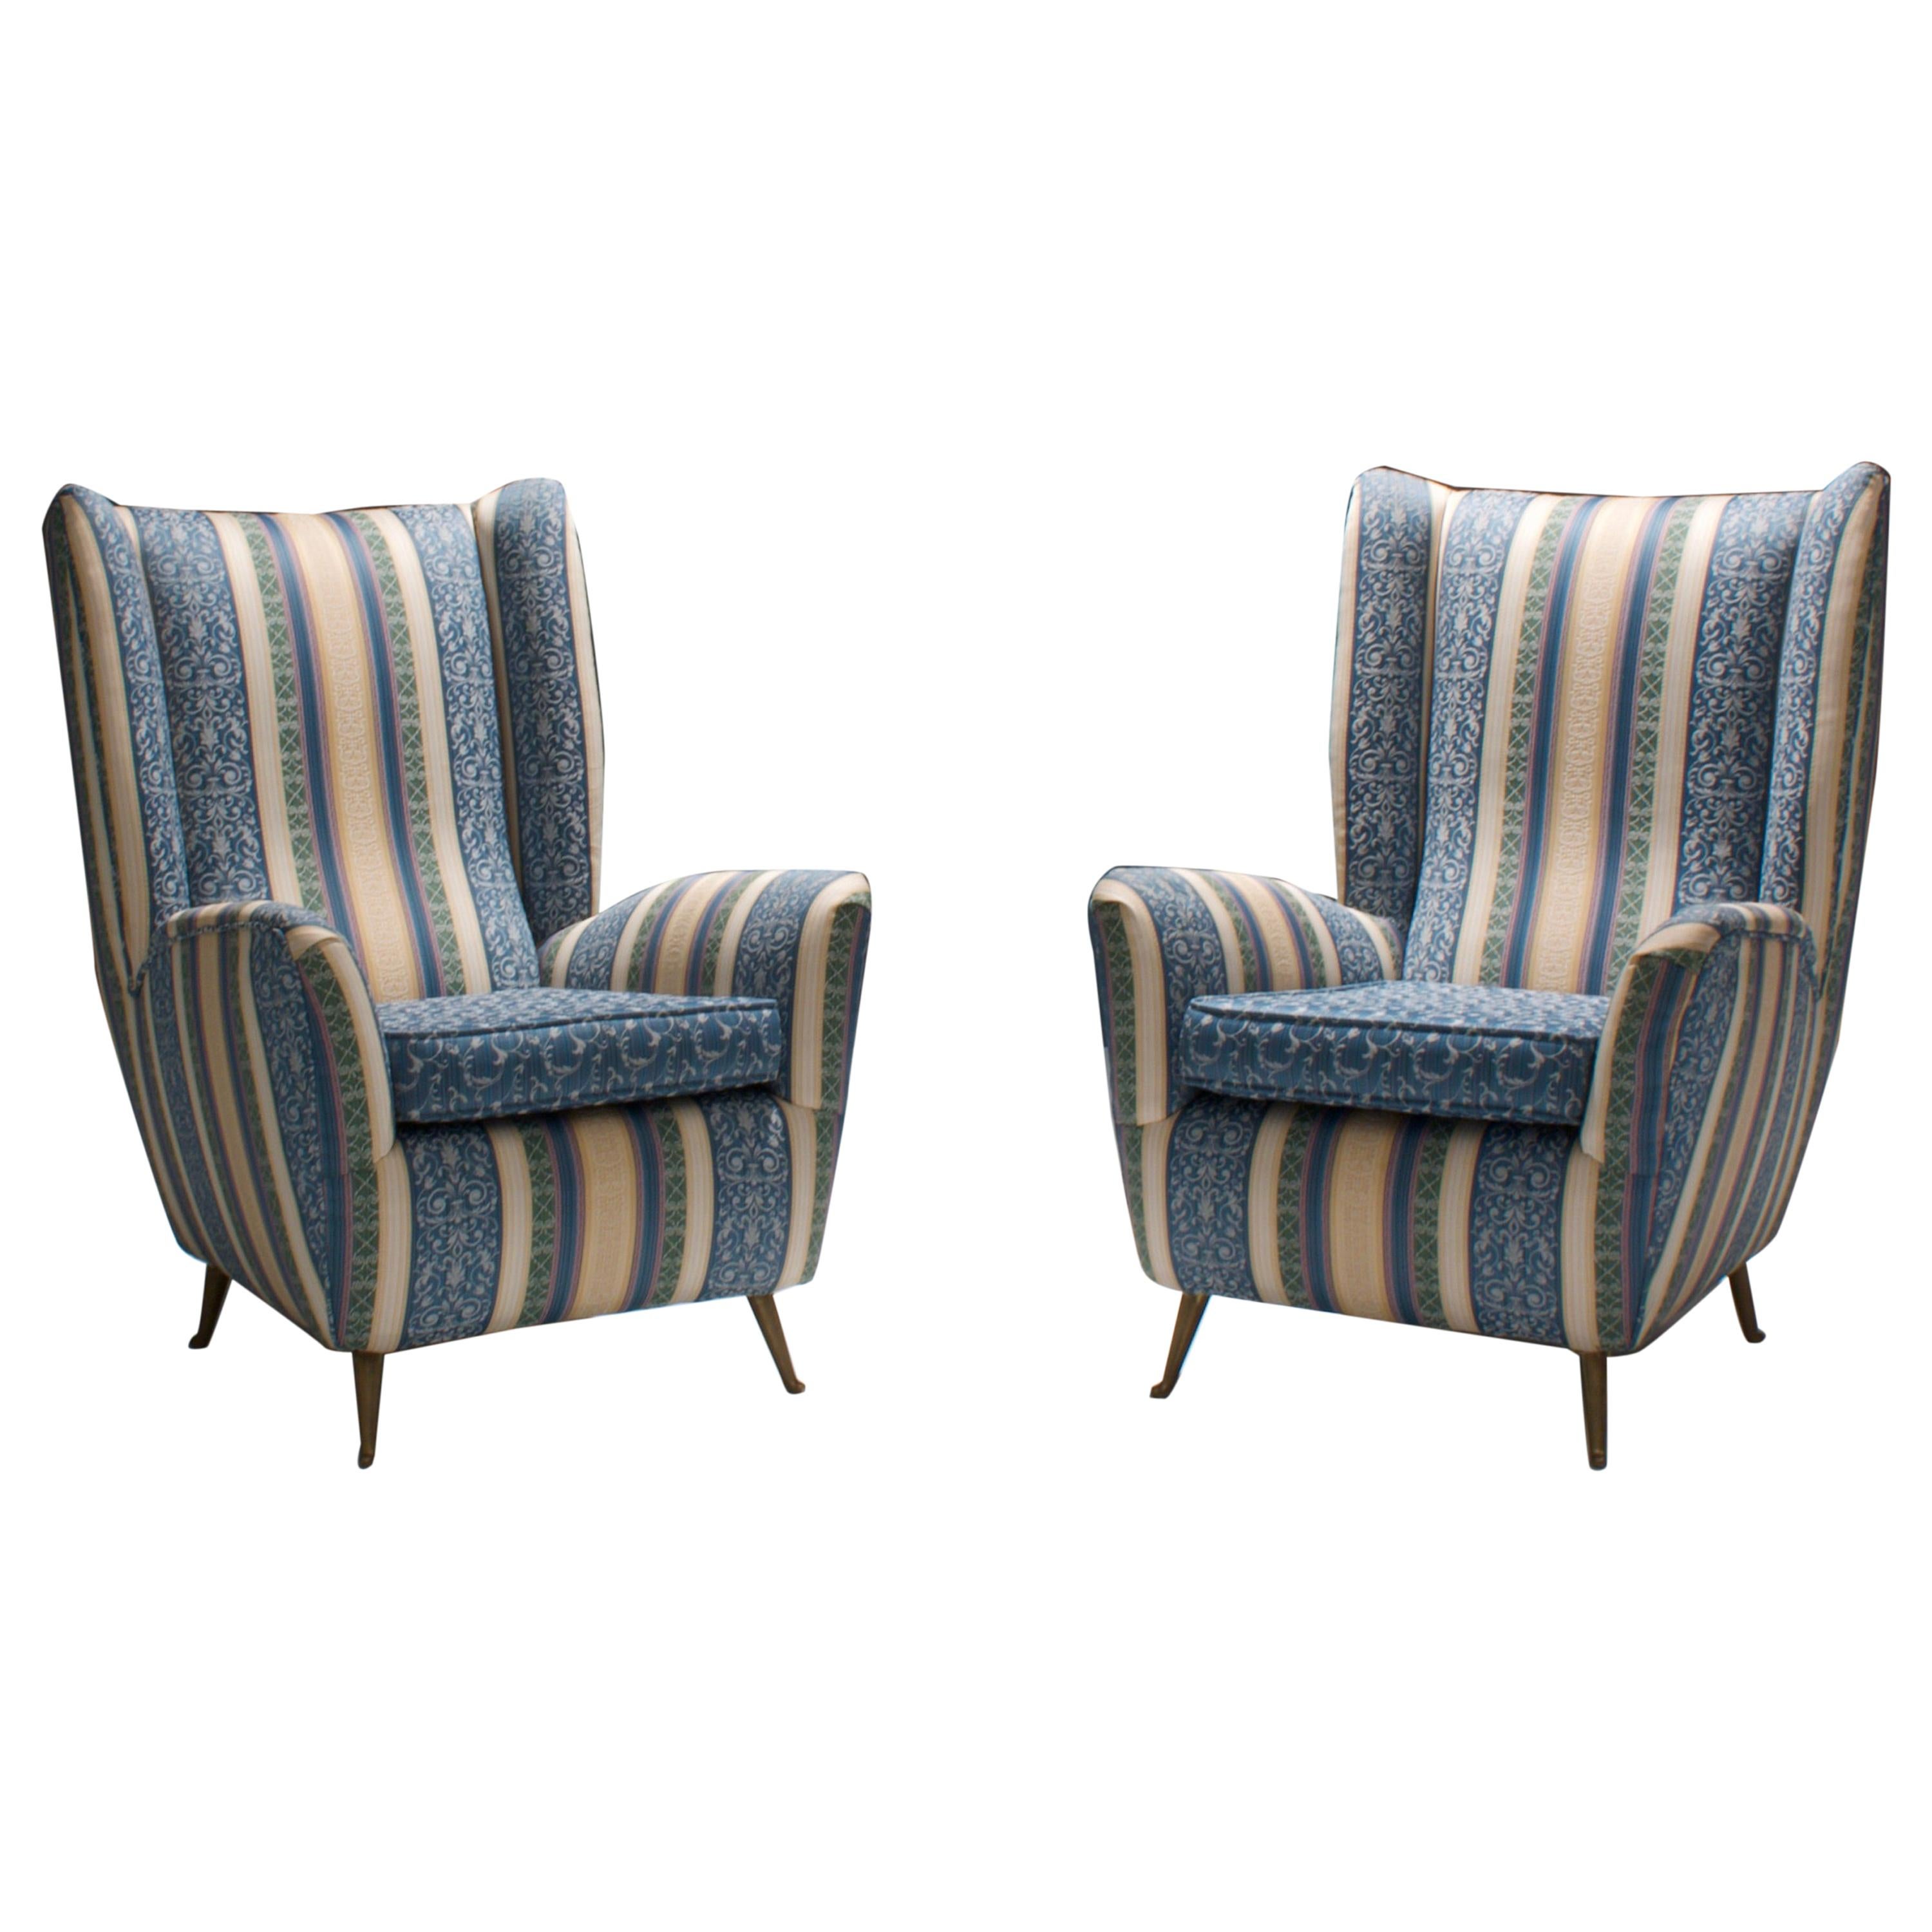 Set of Two Lounge Chairs by I.S.A. in Silk Upholstery and Brass, Italy, 1950s